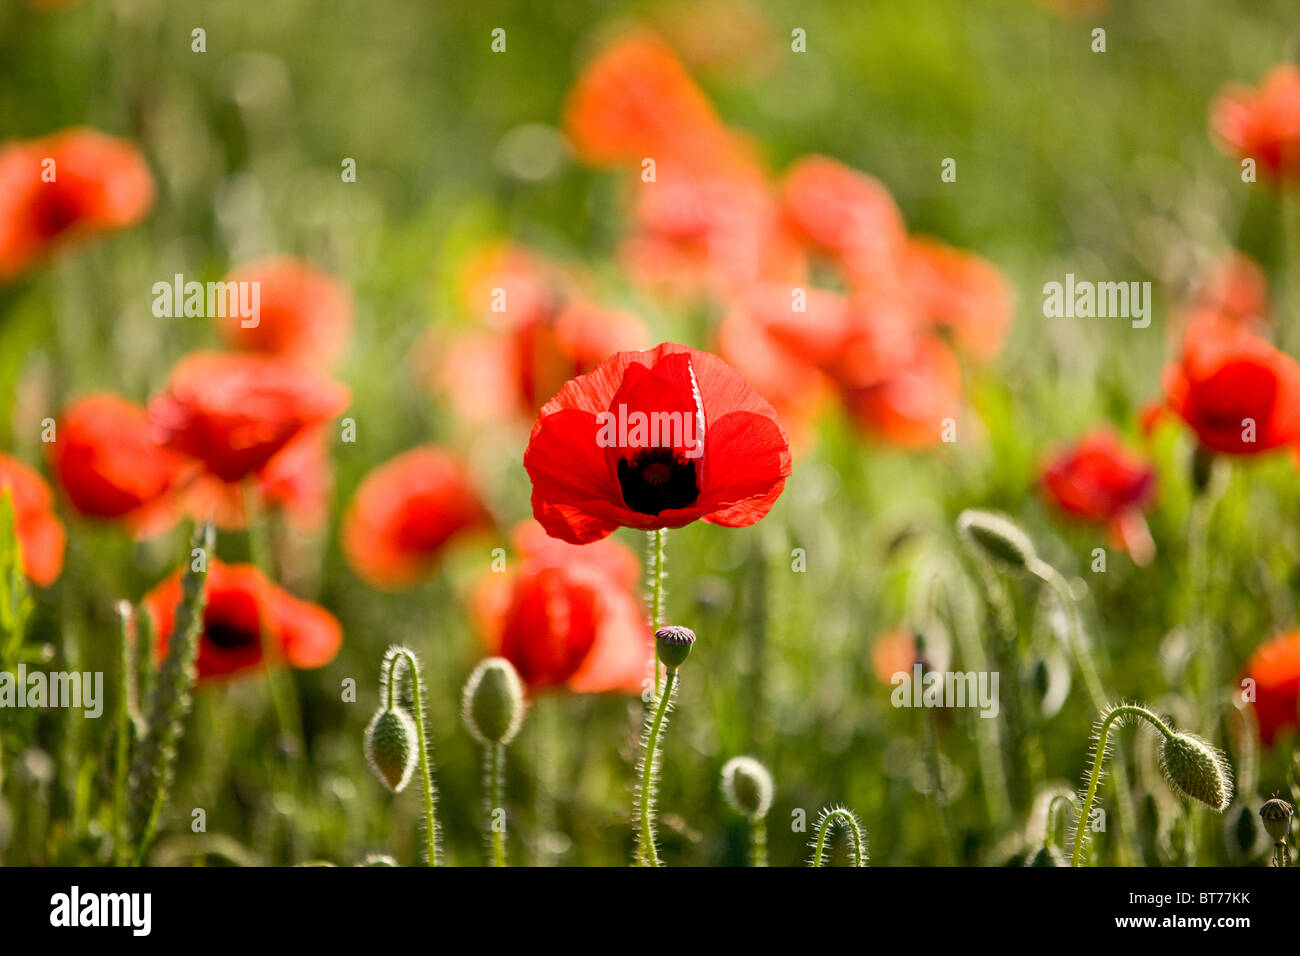 Red poppies in a field, one poppy in the foreground Stock Photo - Alamy